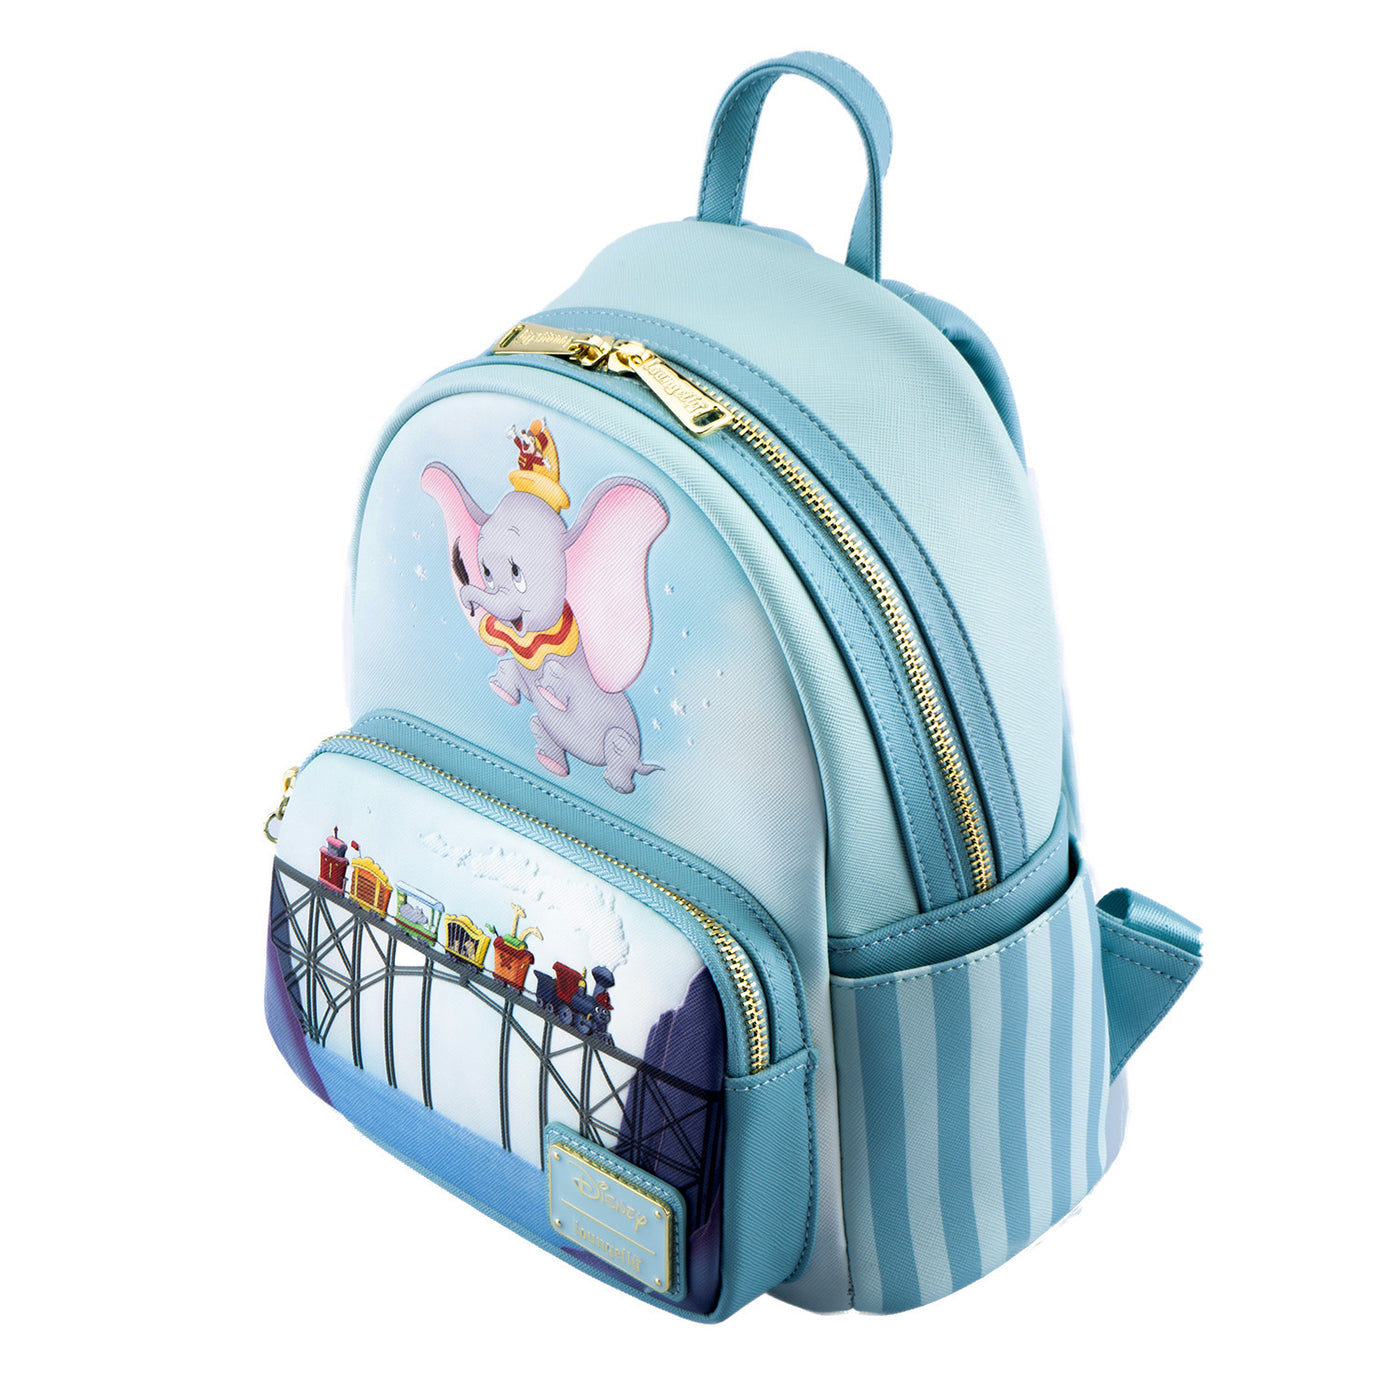 Loungefly Disney Dumbo Don't Just Fly Mini Backpack